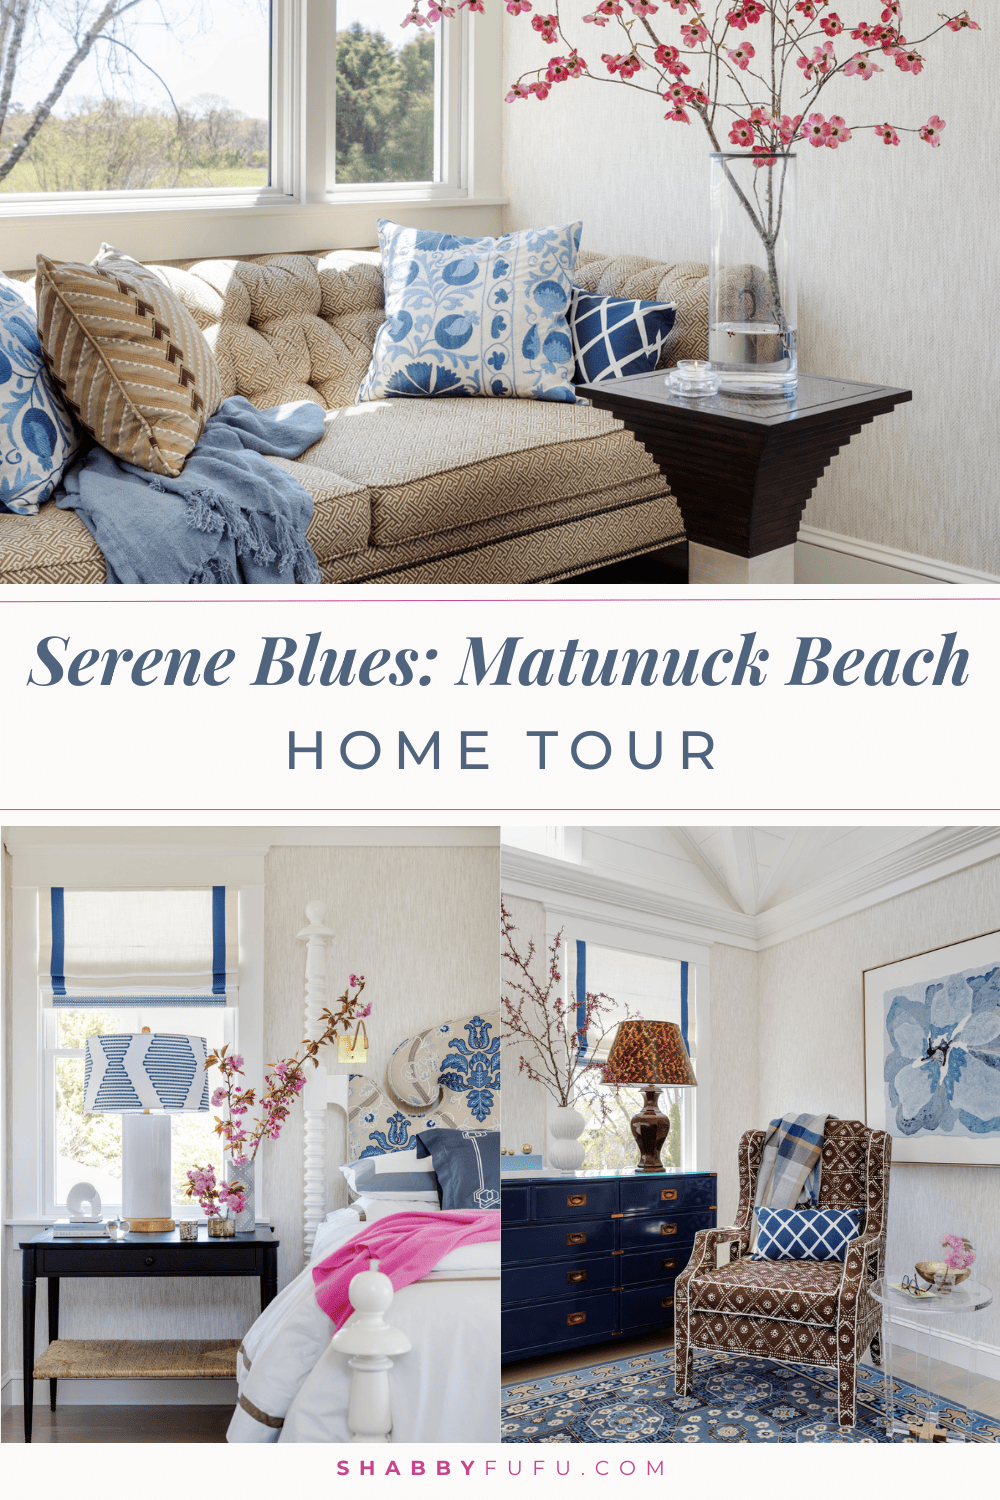 Pinterest decorative collage featuring pictures from home tour titled "Serene Blues Matunuck Beach Home Tour"